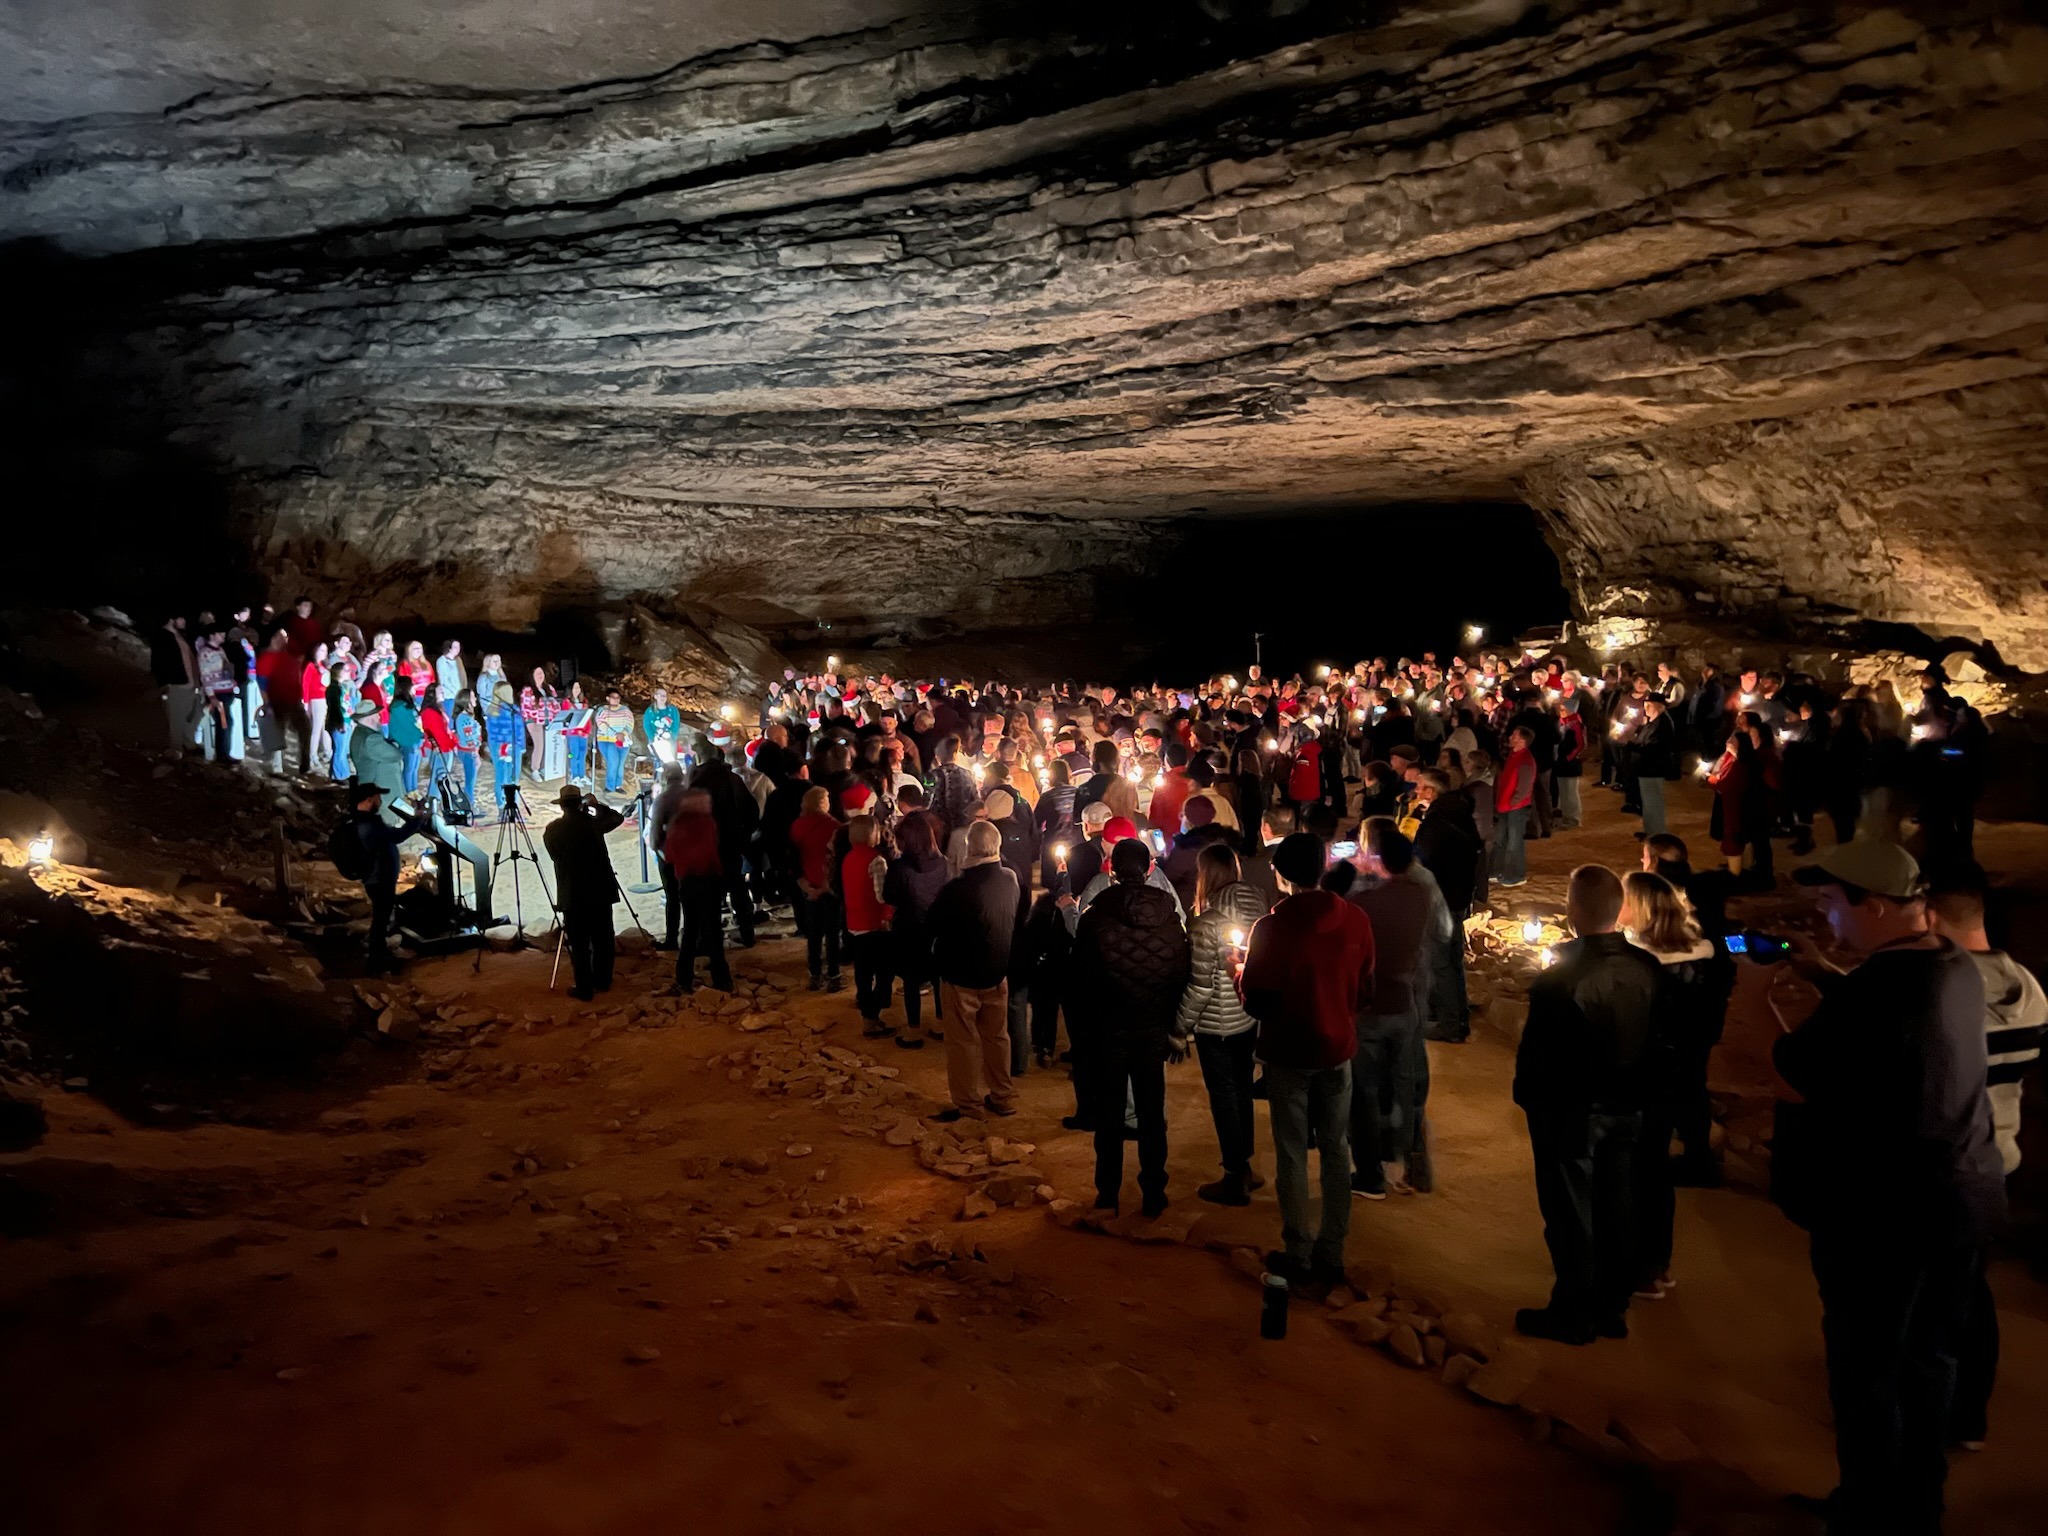 Over 700 show for annual Mammoth Cave National Park 'Cave Sing'